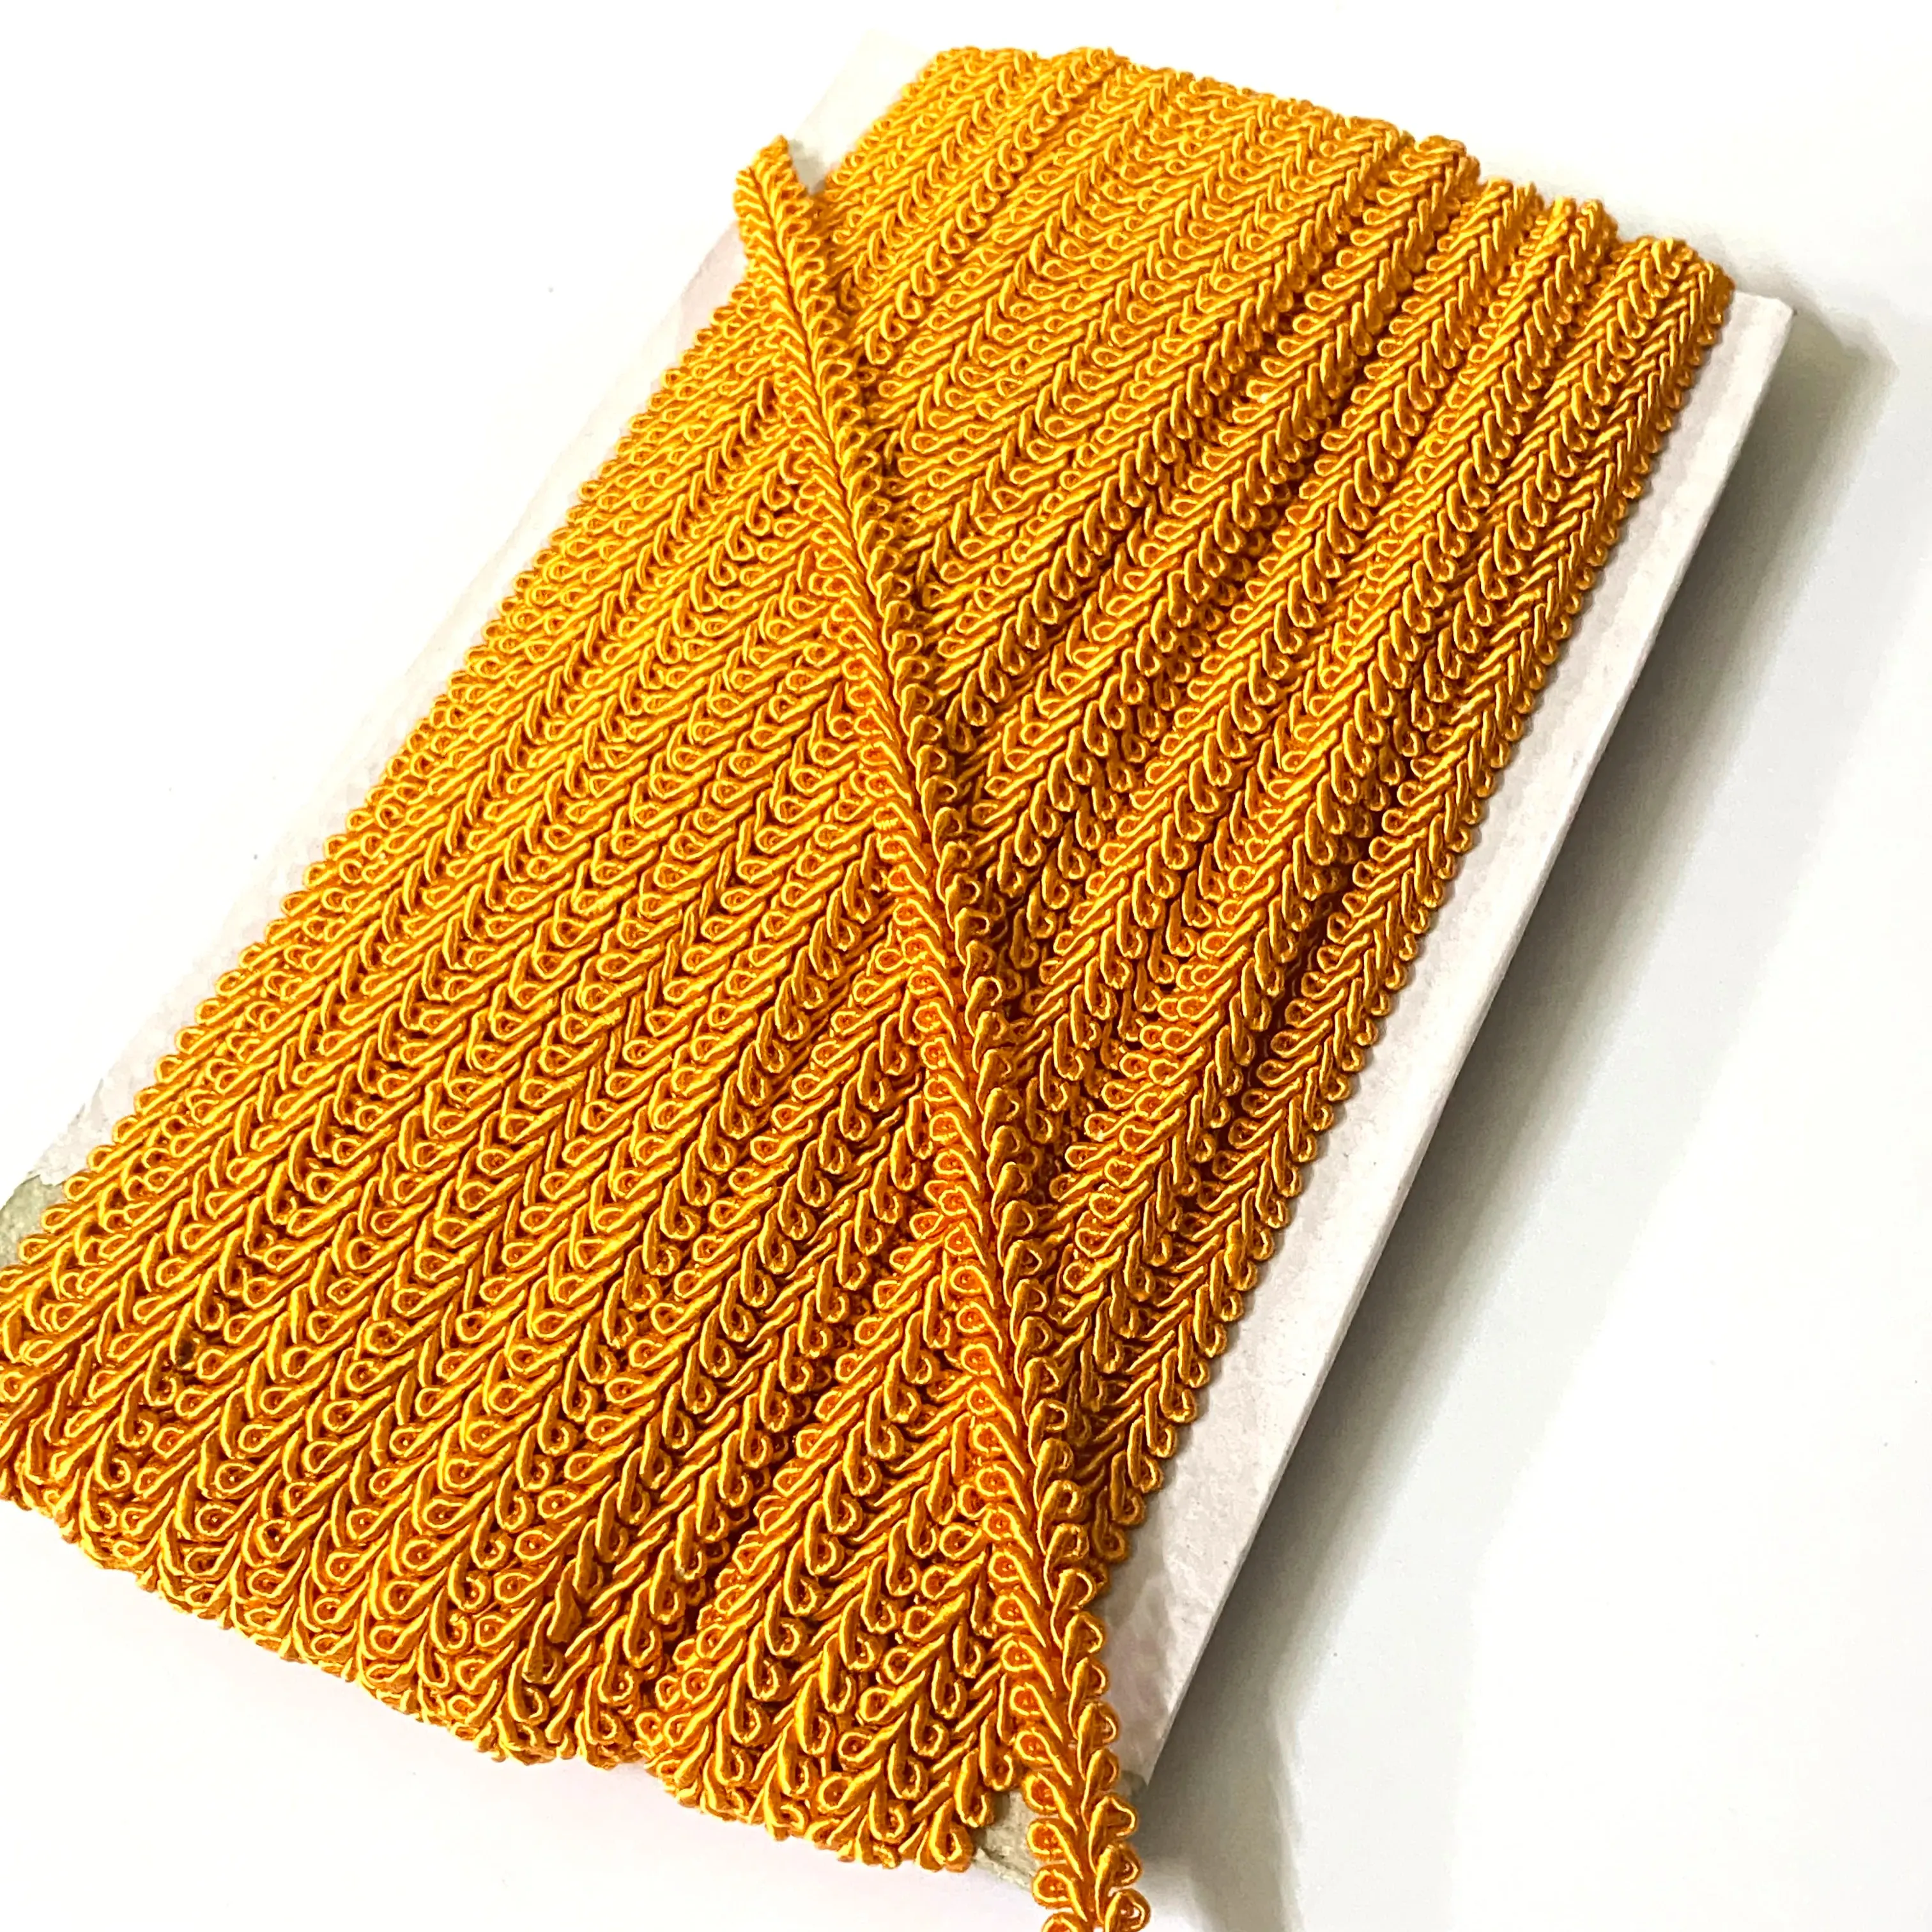 Polyester Lace Trim For Furniture Ribbon Antique Gold Waves Deals In Wholesale